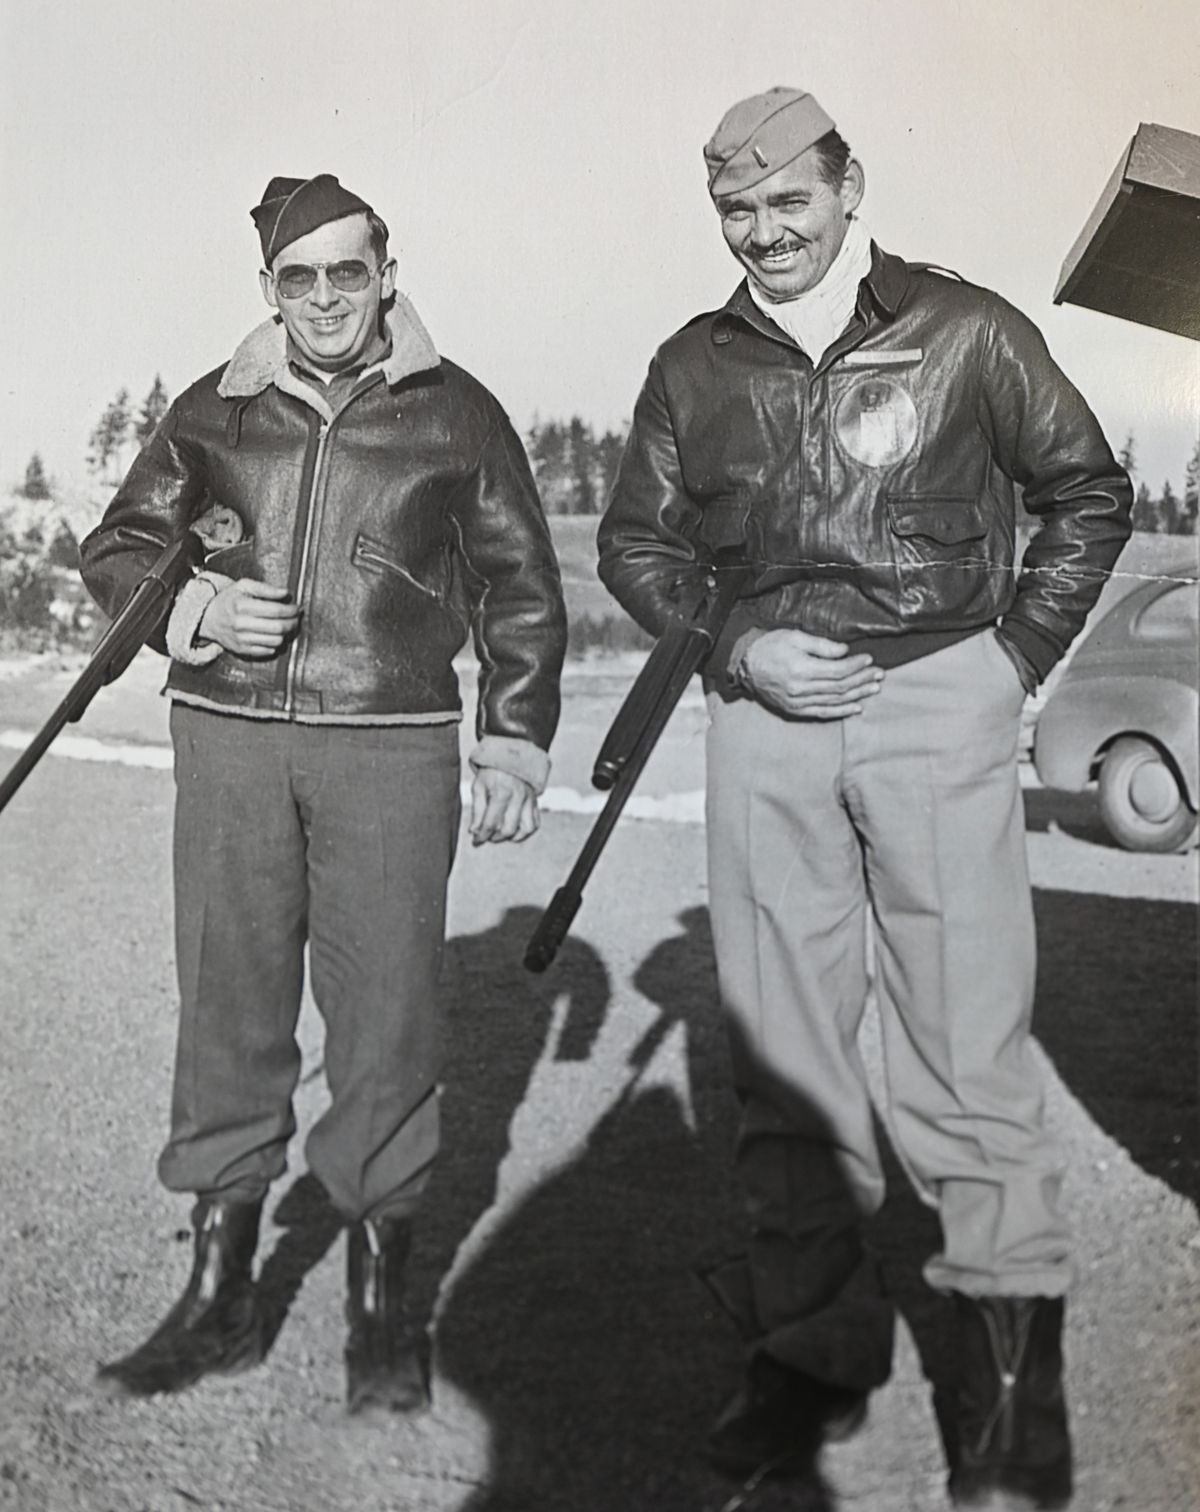 Merrill W. “Bill” Willan, left, stands next to movie idol Clark Gable during gunnery training at Camp Seven Mile in January 1943. Gable flew five missions in Europe aboard bombers. This photo and others were recently donated to the historical archives at Fairchild Air Force Base, proving once and for all that Gable took training in Spokane for several weeks before shipping out for Europe.  (Fairchild Air Force Base archive)